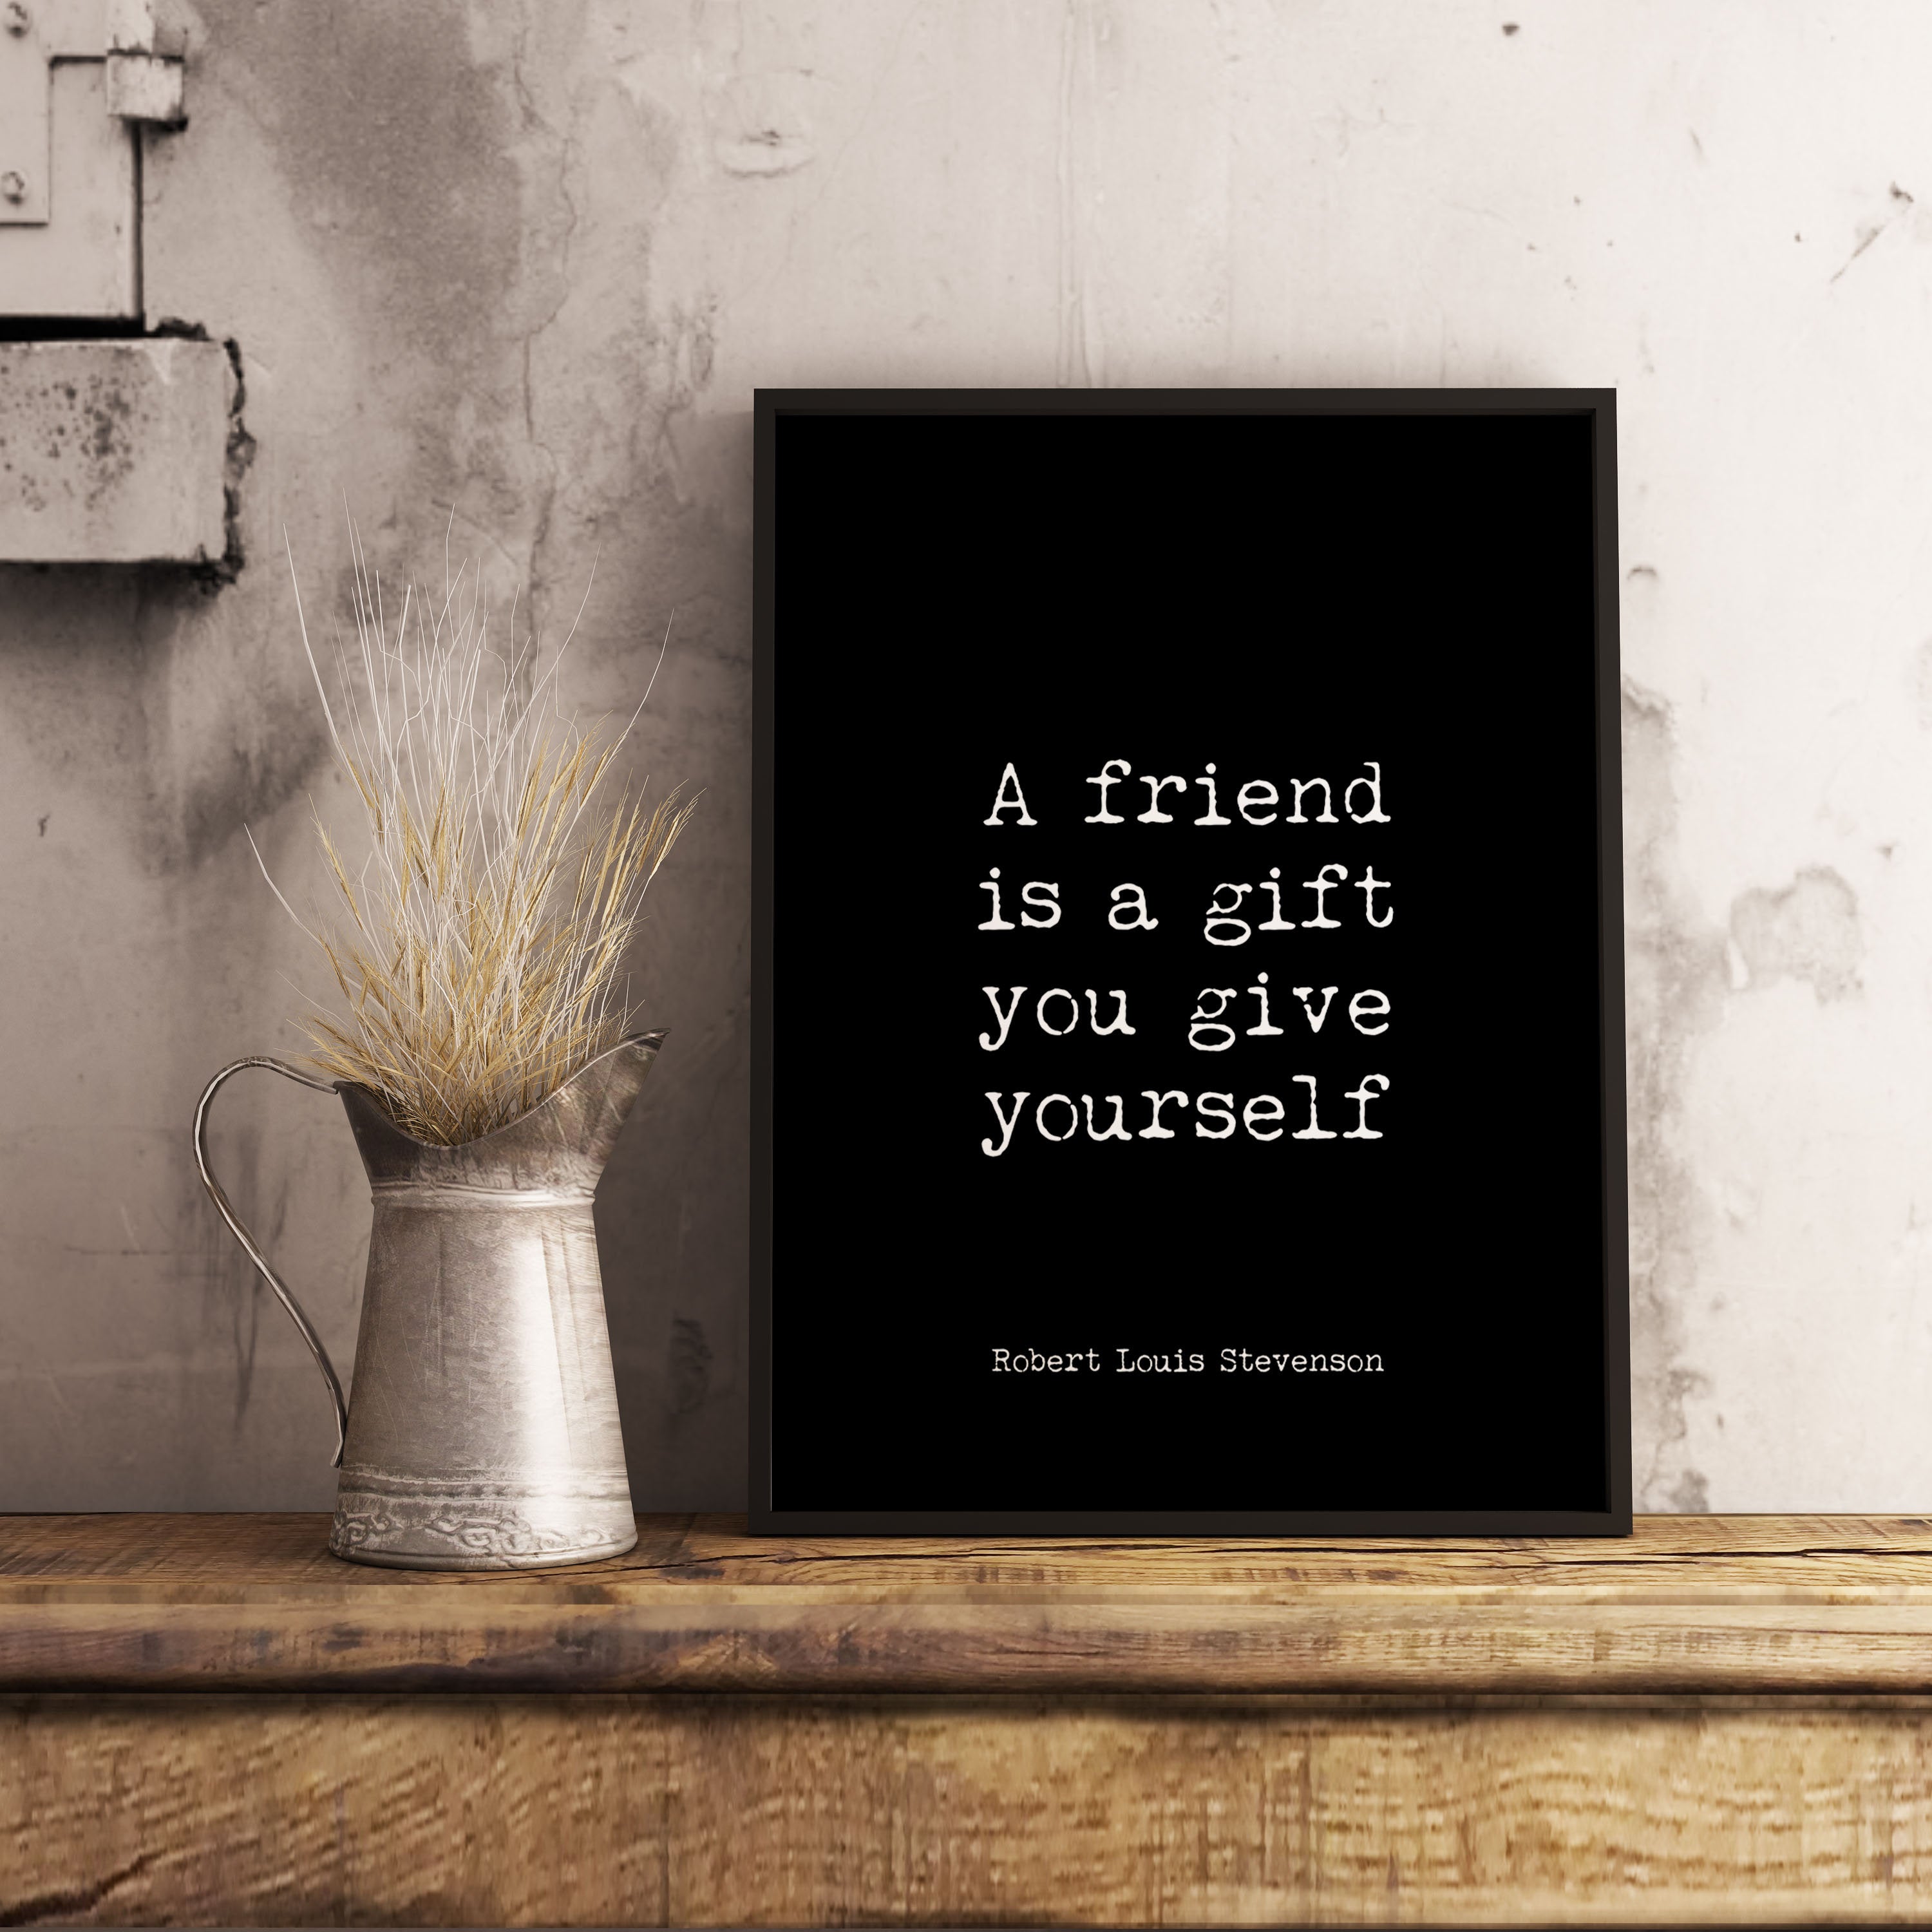 Robert Louis Stevenson Friendship Quote Print in Black & White, Best Friend Gift, A friend is a gift you give yourself - BookQuoteDecor